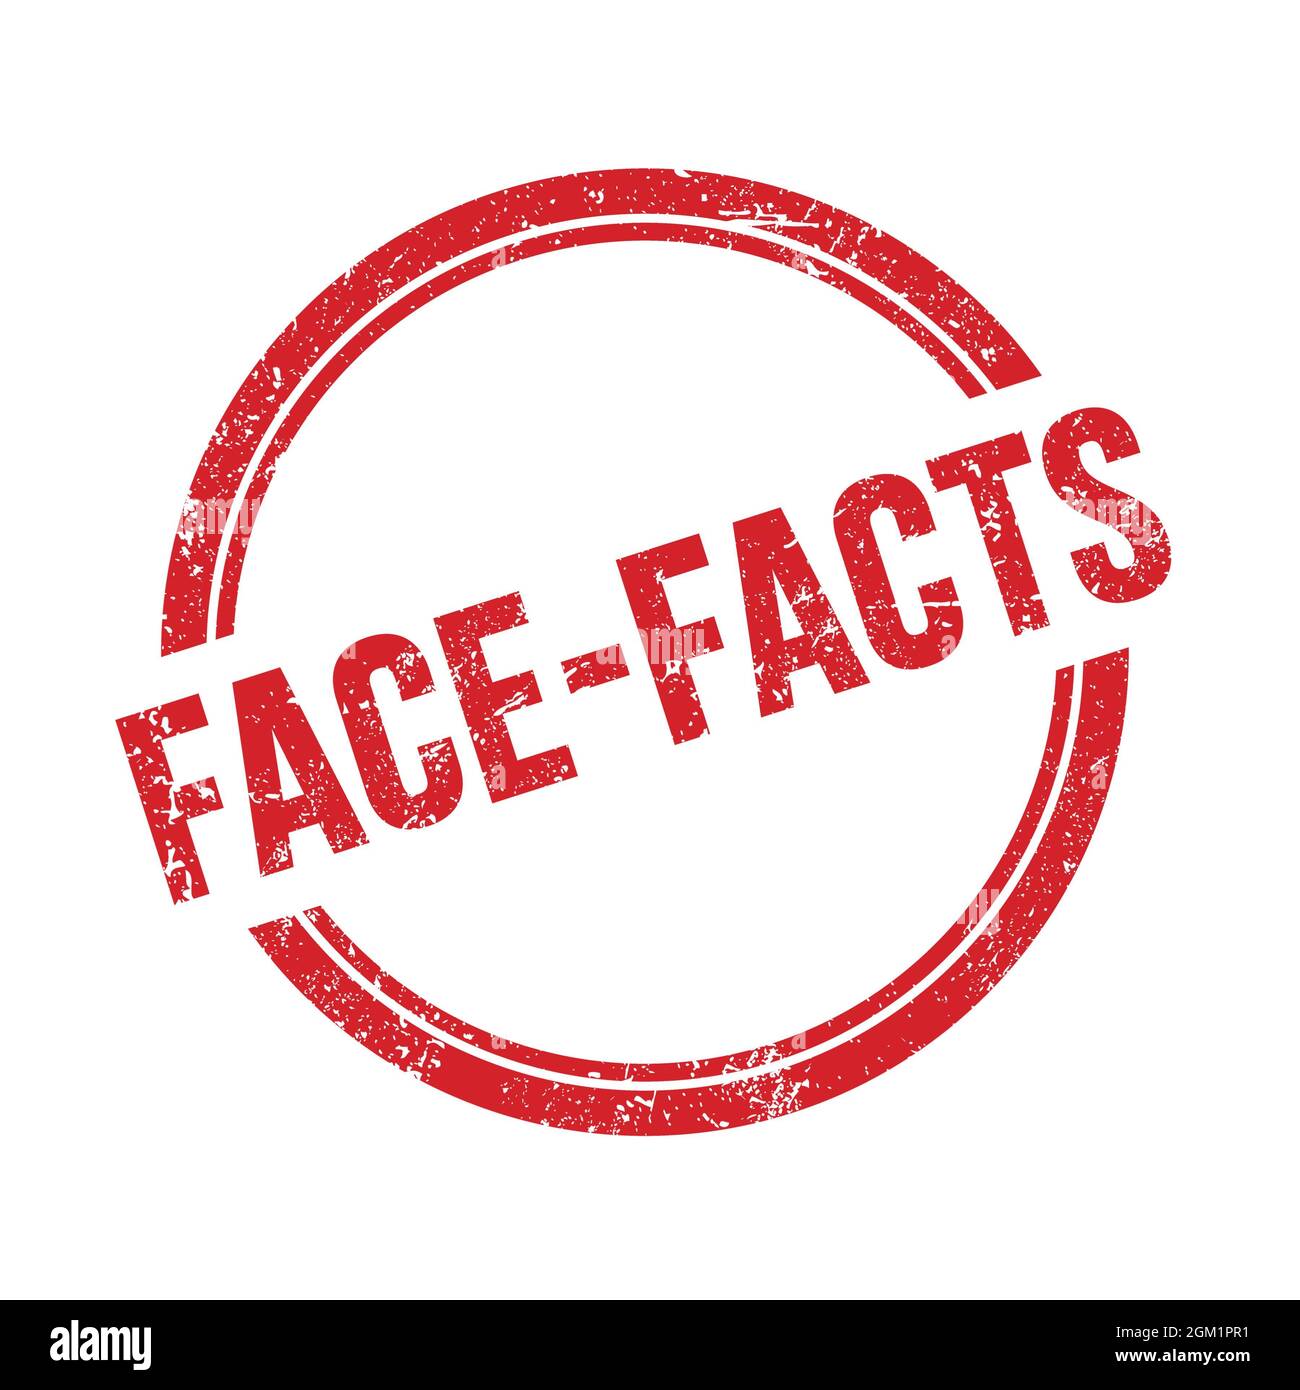 FACE-FACTS text written on red grungy vintage round stamp. Stock Photo